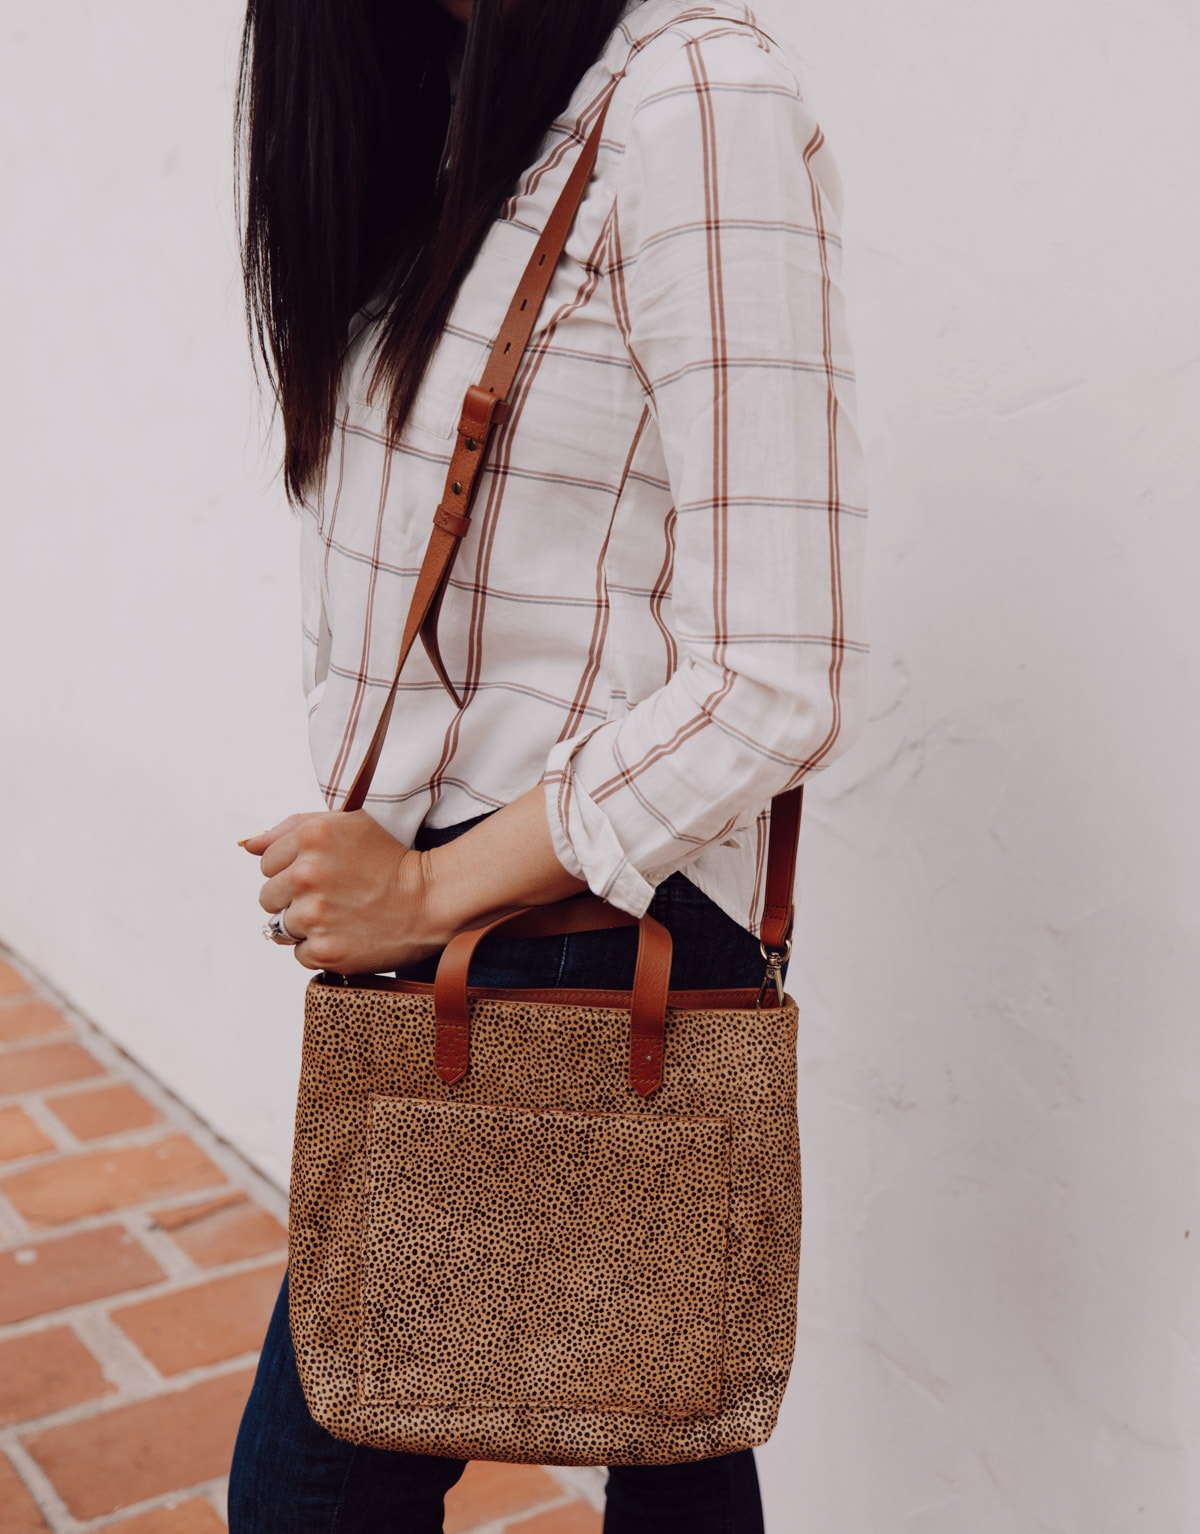 madewell cheetah tote fall outfit